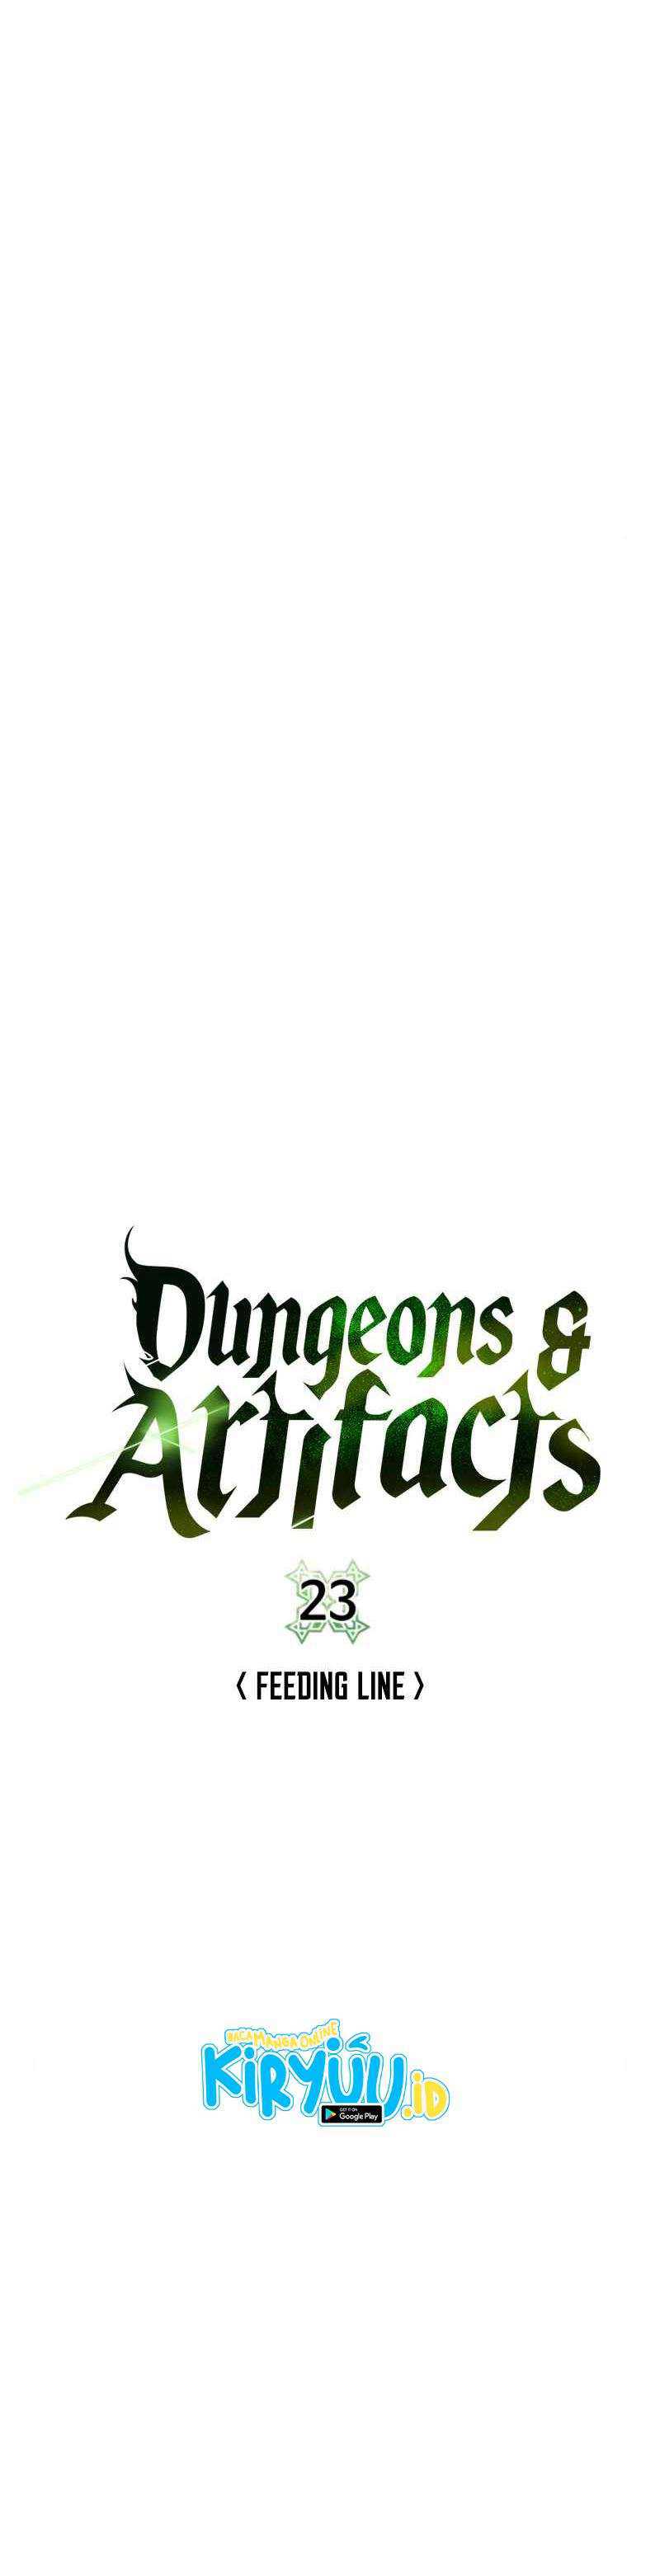 dungeons-artifacts Chapter chapter-23